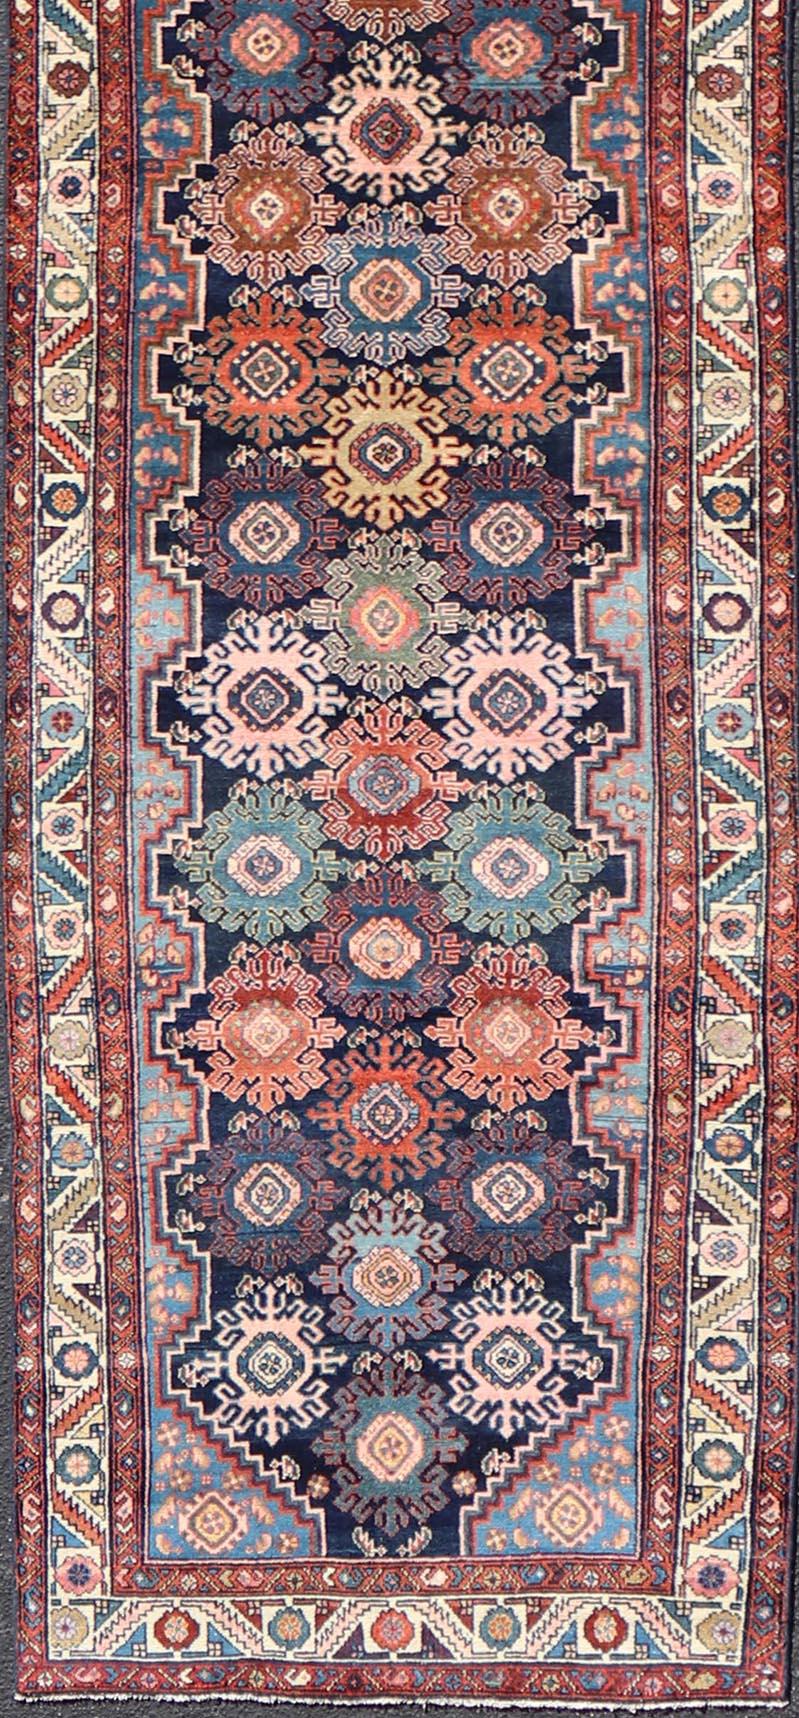 Antique Persian Hamadan Runner with All-Over Geometric Motifs In Jewel Tones For Sale 2